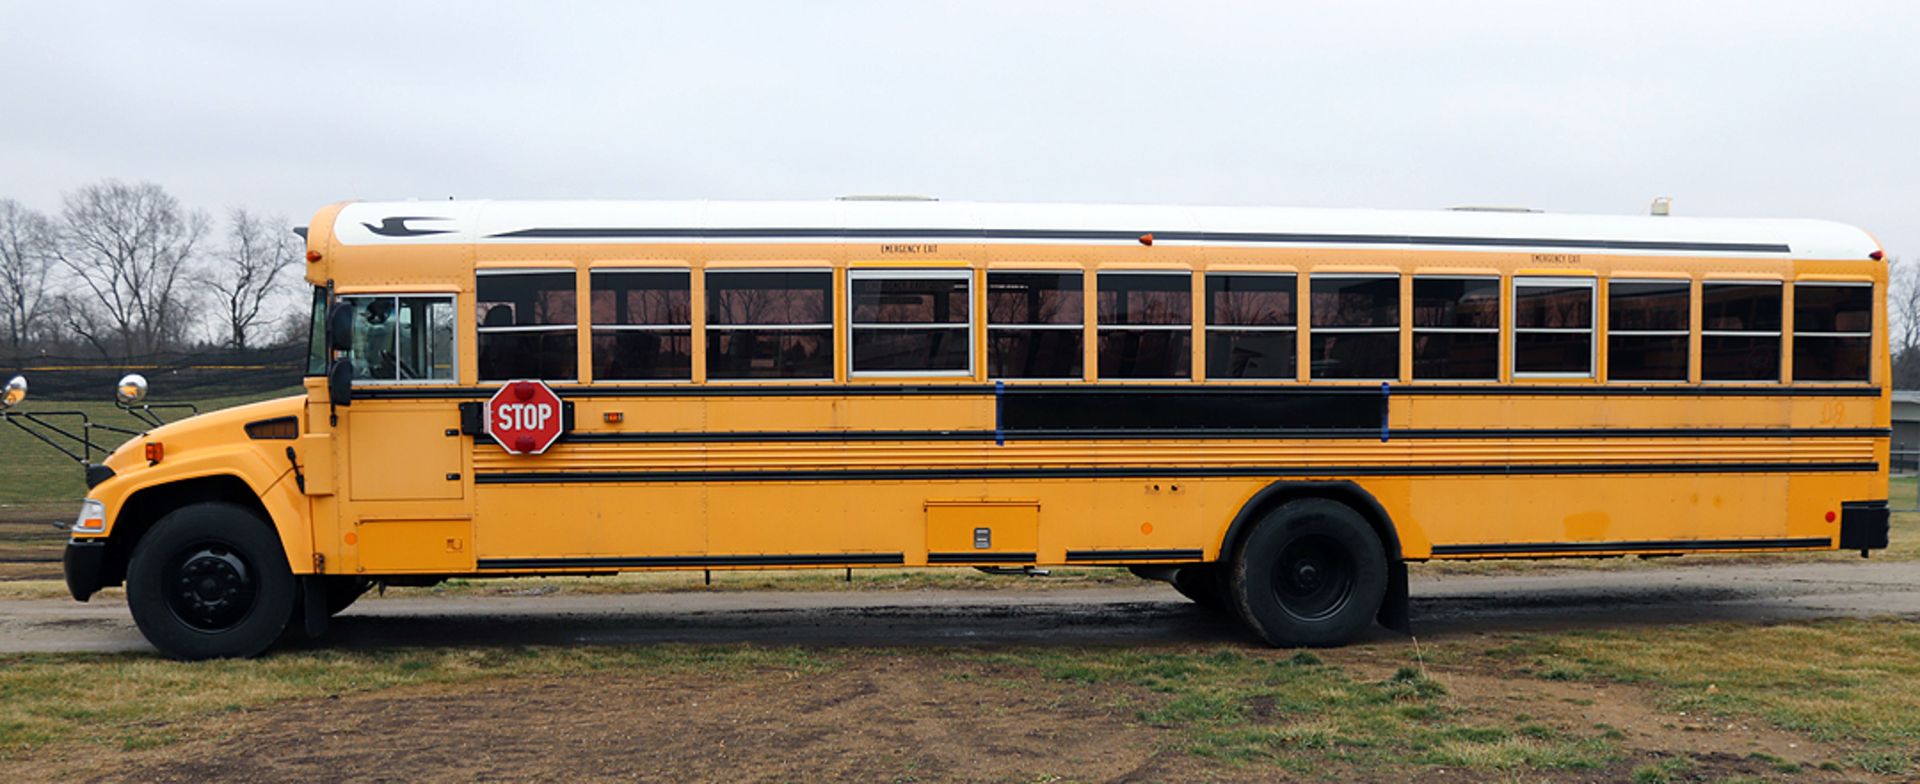 2010 Bluebird School Bus with Cummins Engine, 142k miles, VIN 1BAKJCPAOBF278655 - Image 4 of 16